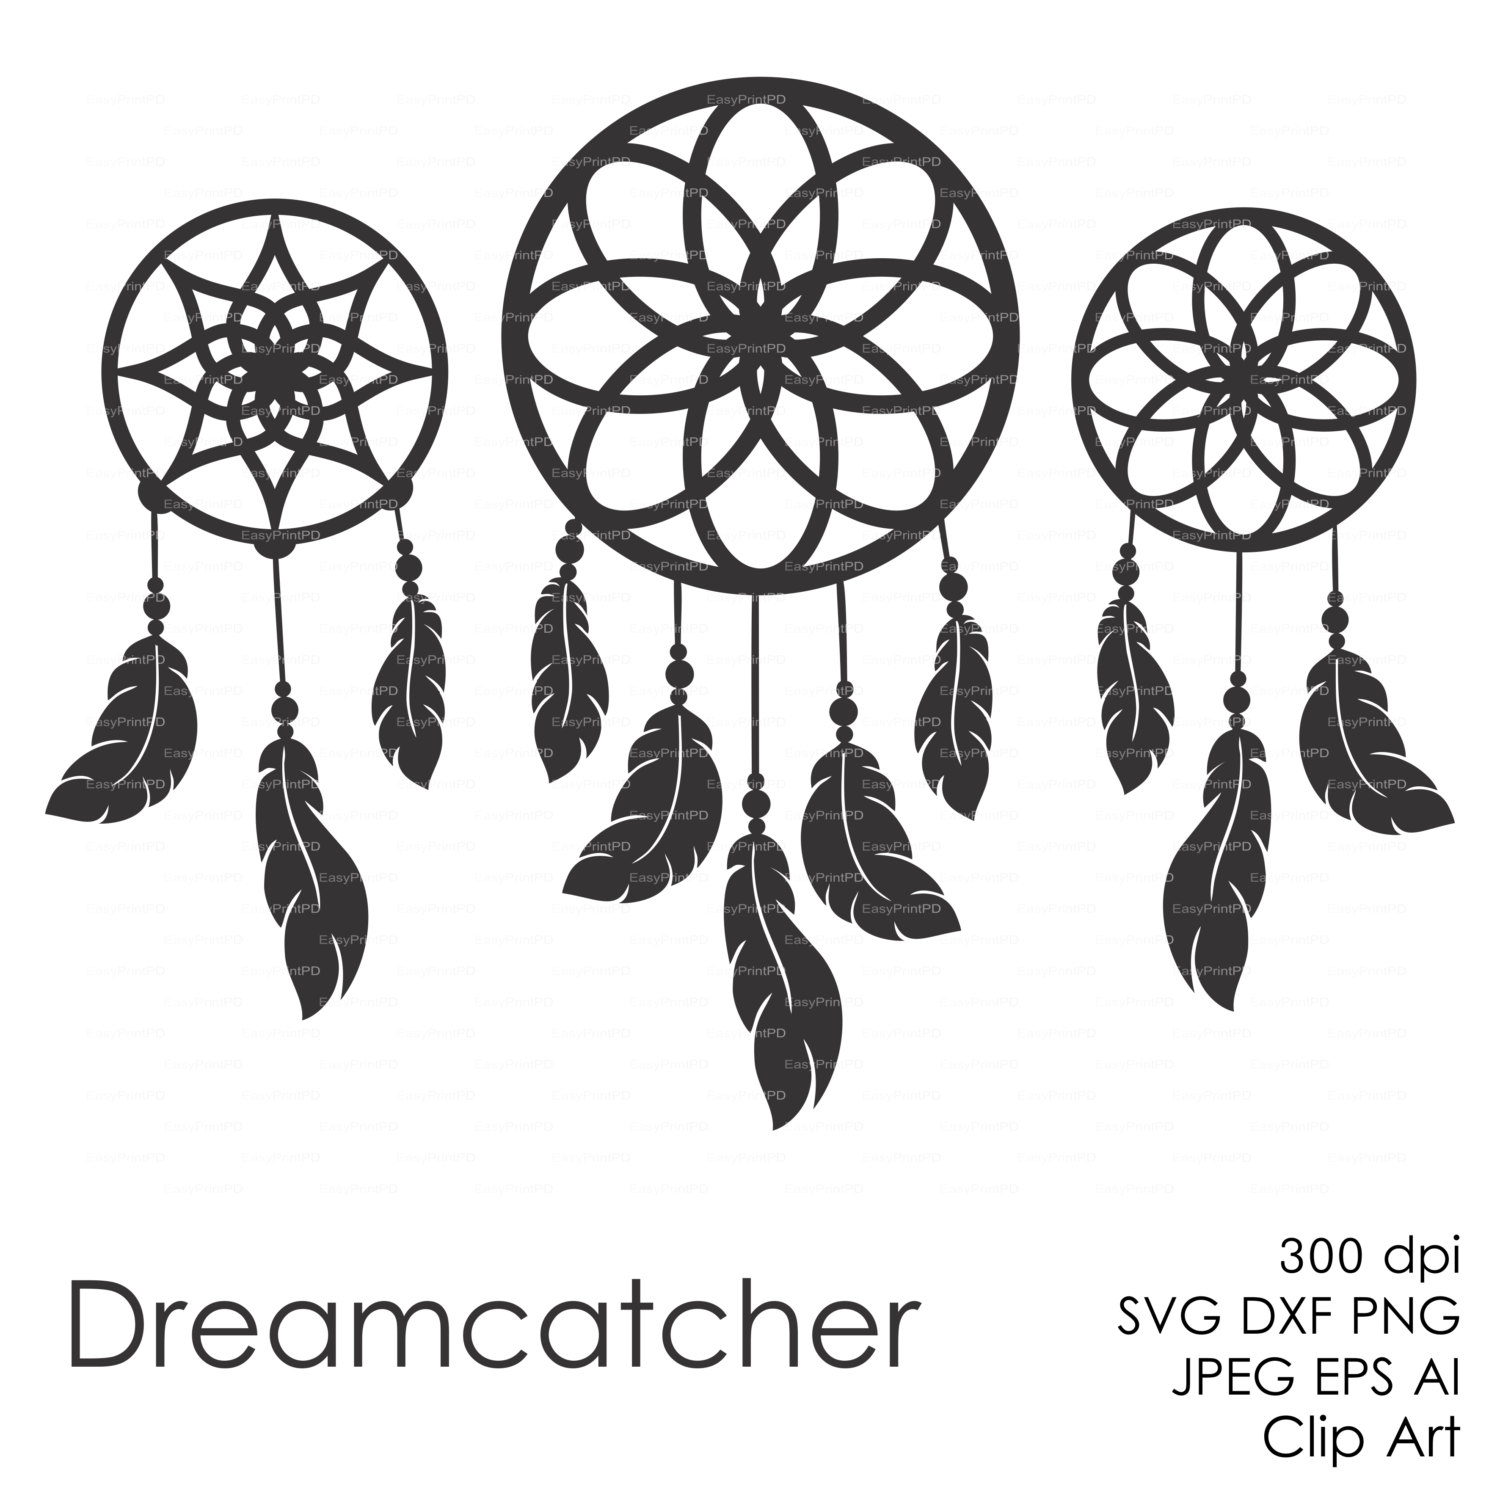 Download Dreamcatcher Feather plume eps svg dxf ai jpg png